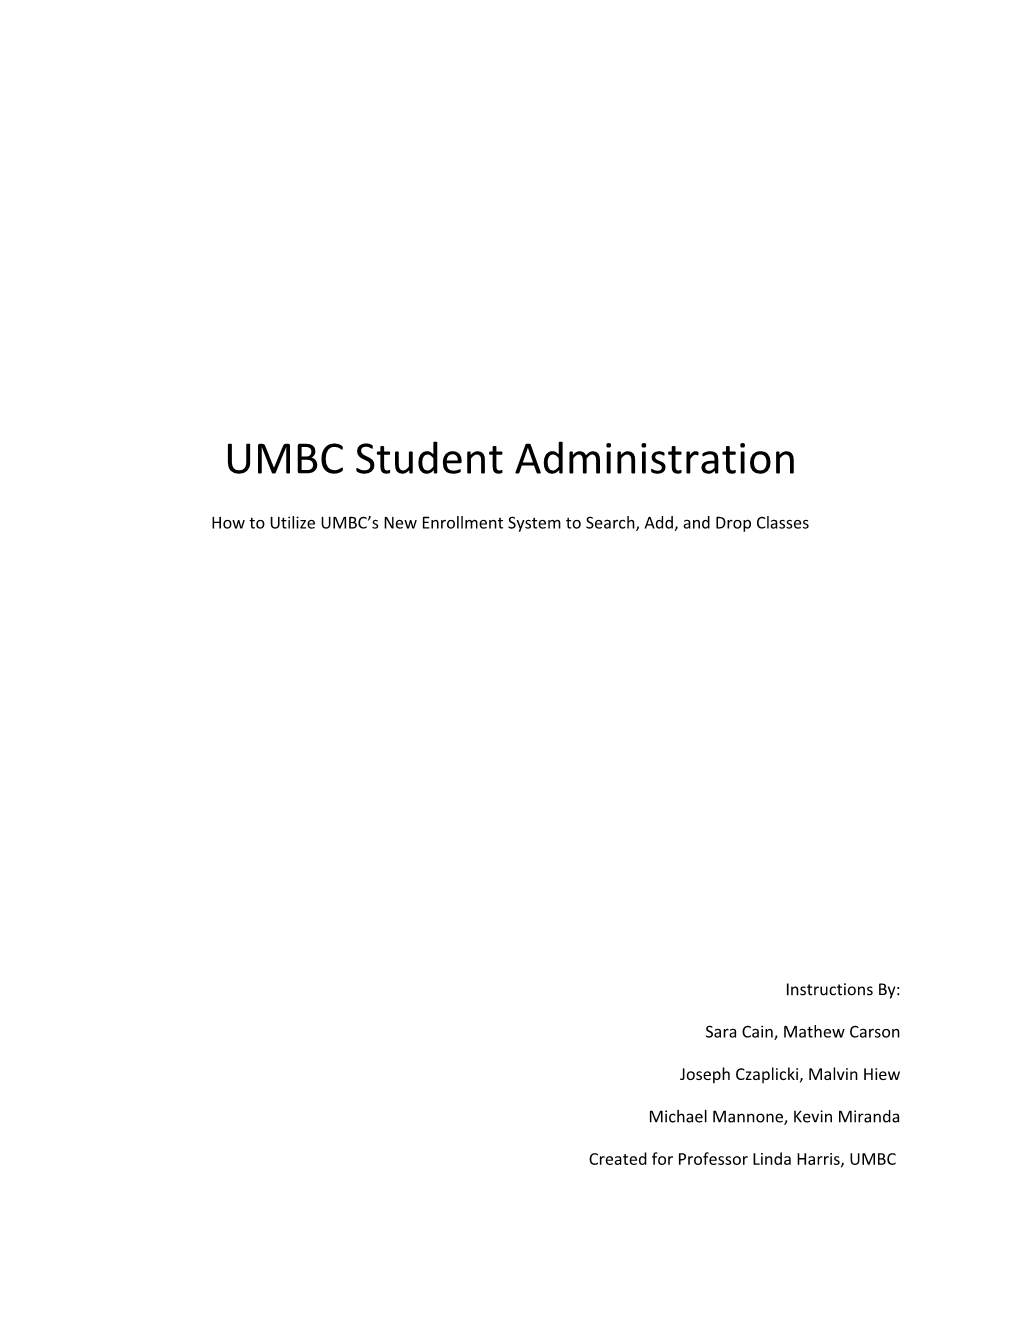 How to Utilize UMBC S New Enrollment System to Search, Add, and Drop Classes